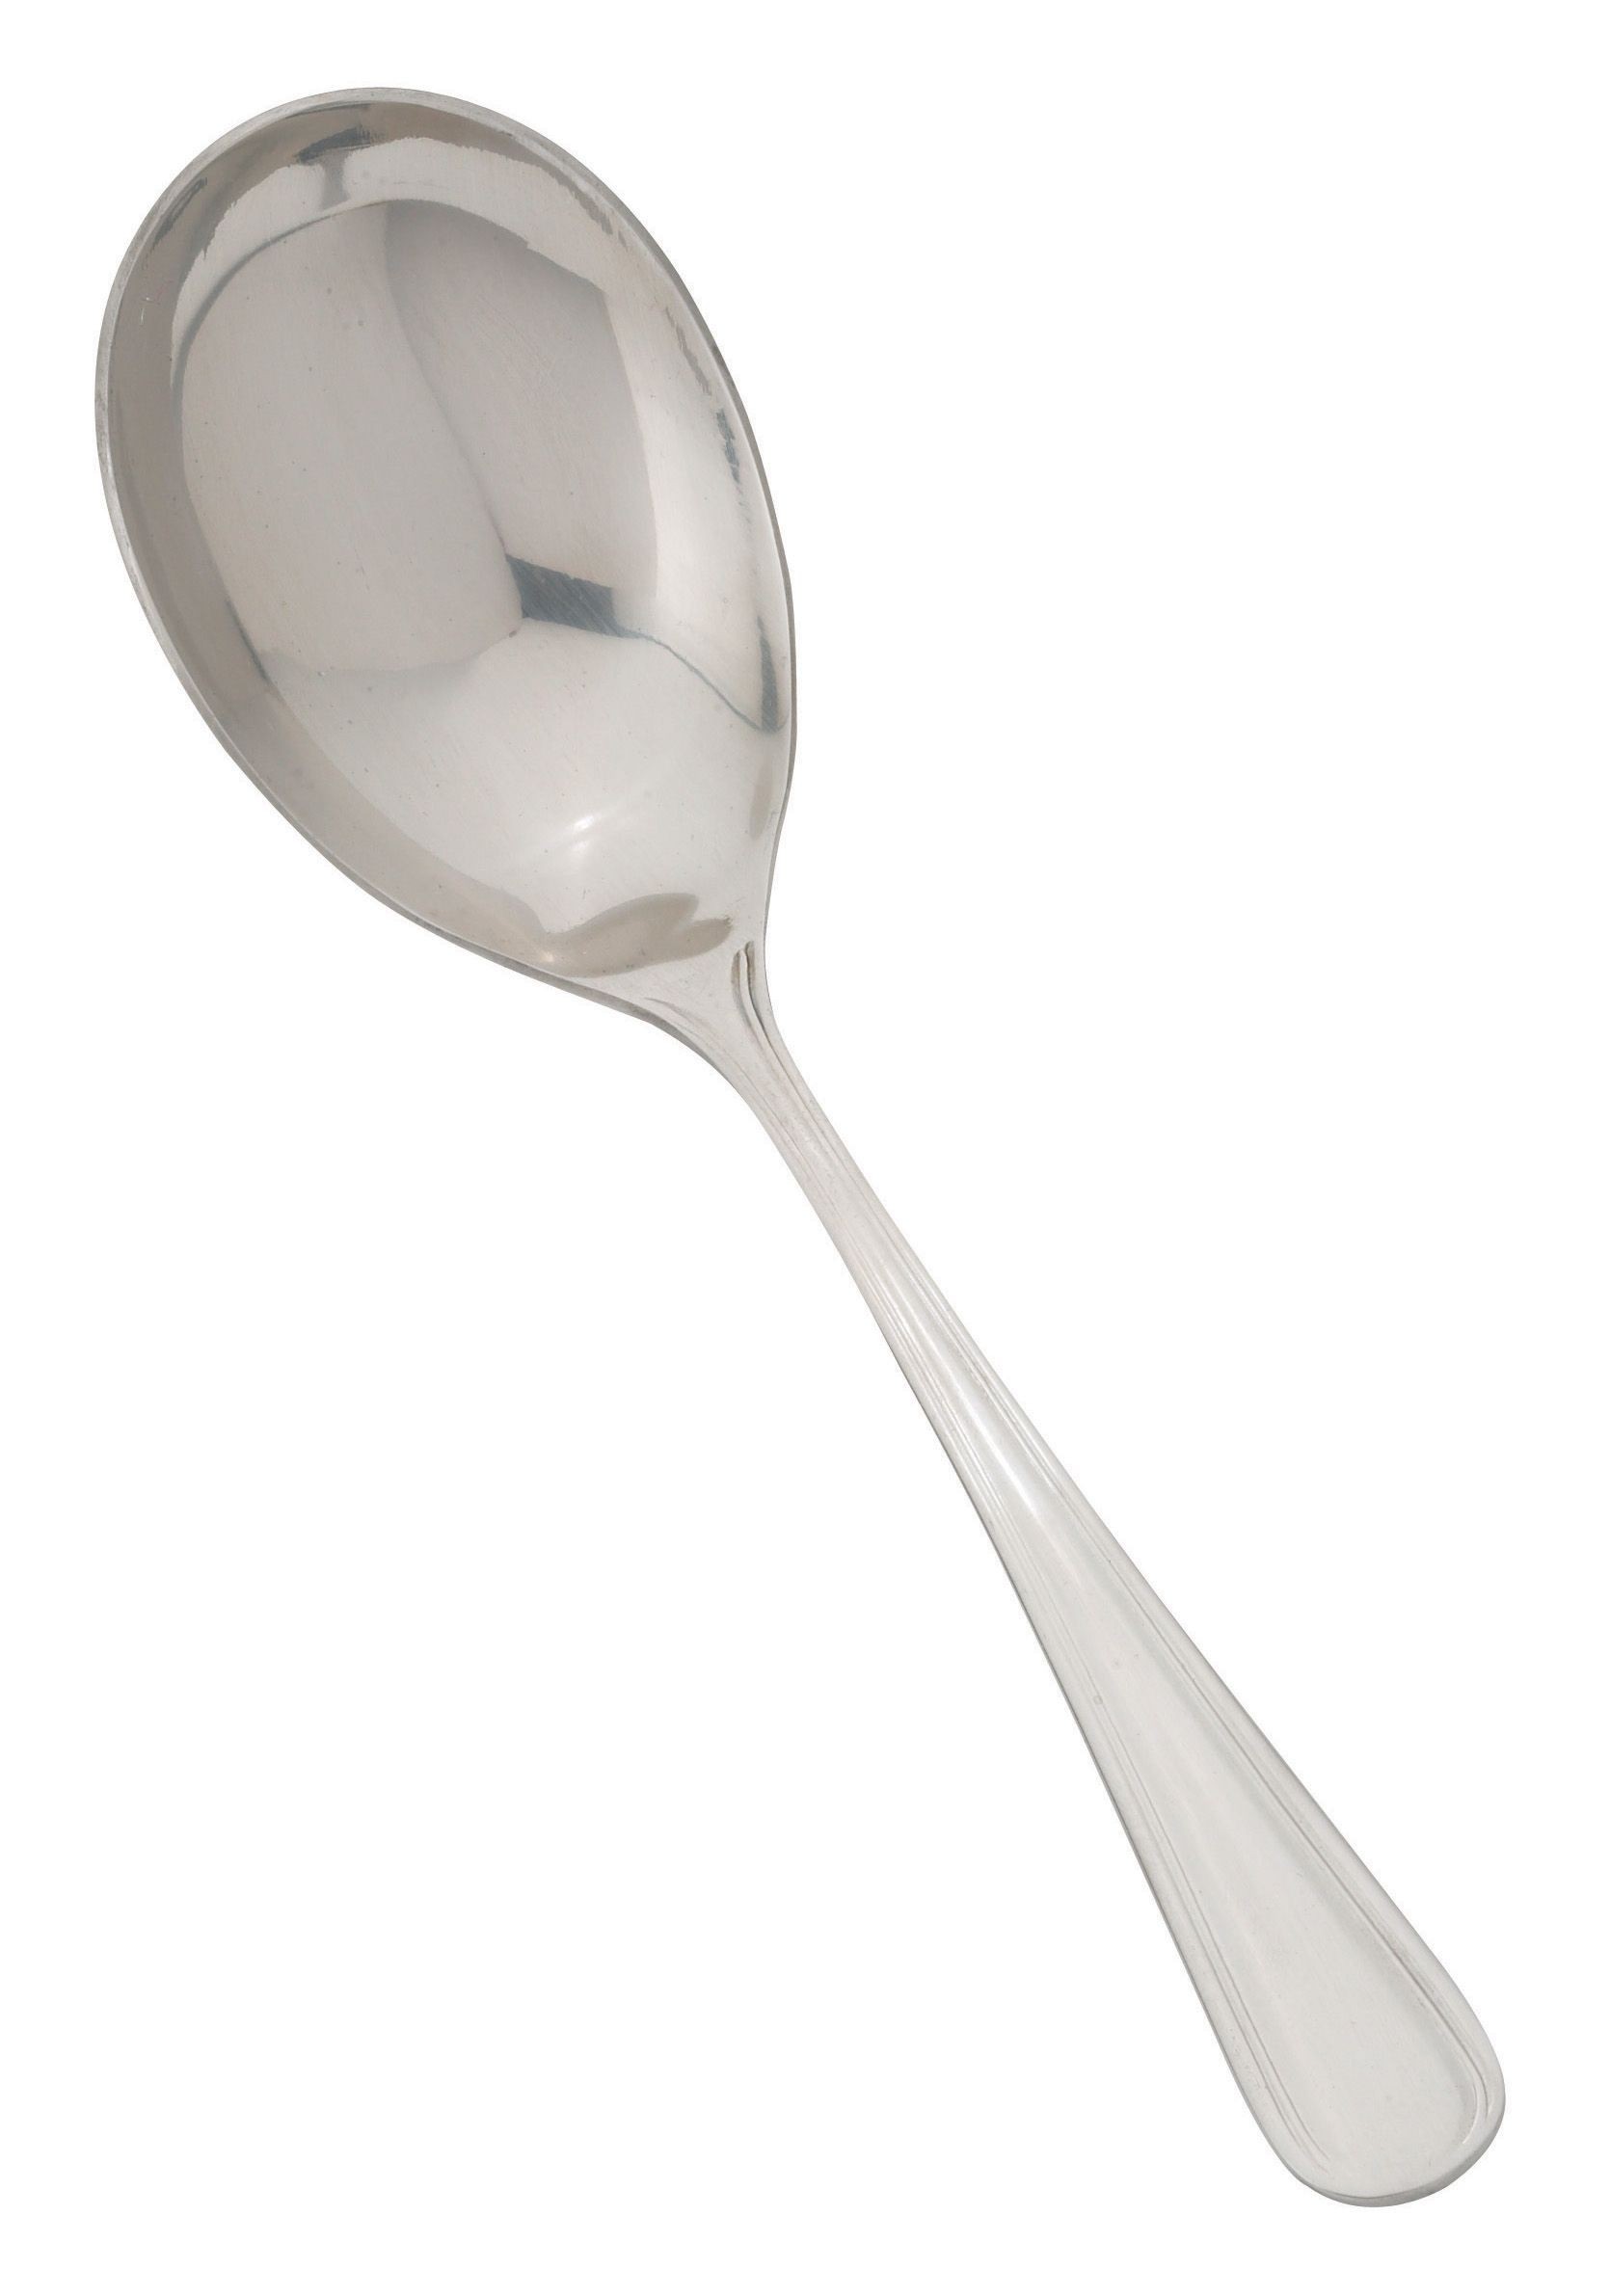 Winco 0030-21 Shangarila Stainless Steel Large Bowl Serving Spoon, 9" (12/Pack)